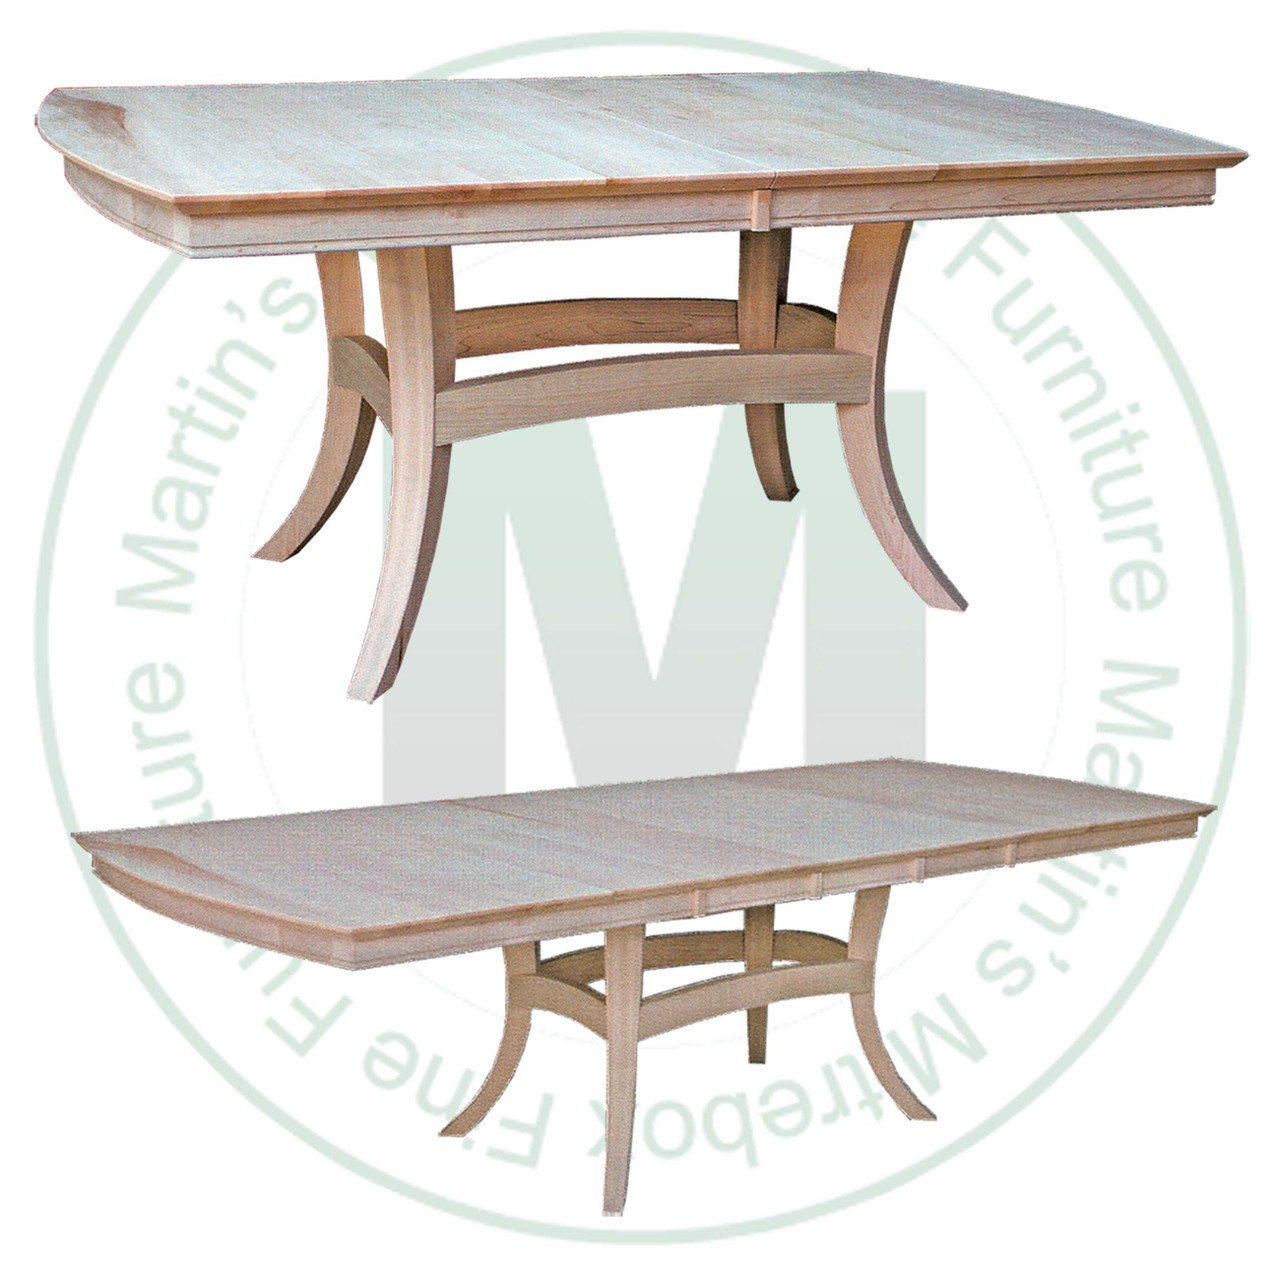 Maple Tokyo Double Pedestal Table 48''D x 66''W x 30''H With 2 - 12'' Leaves